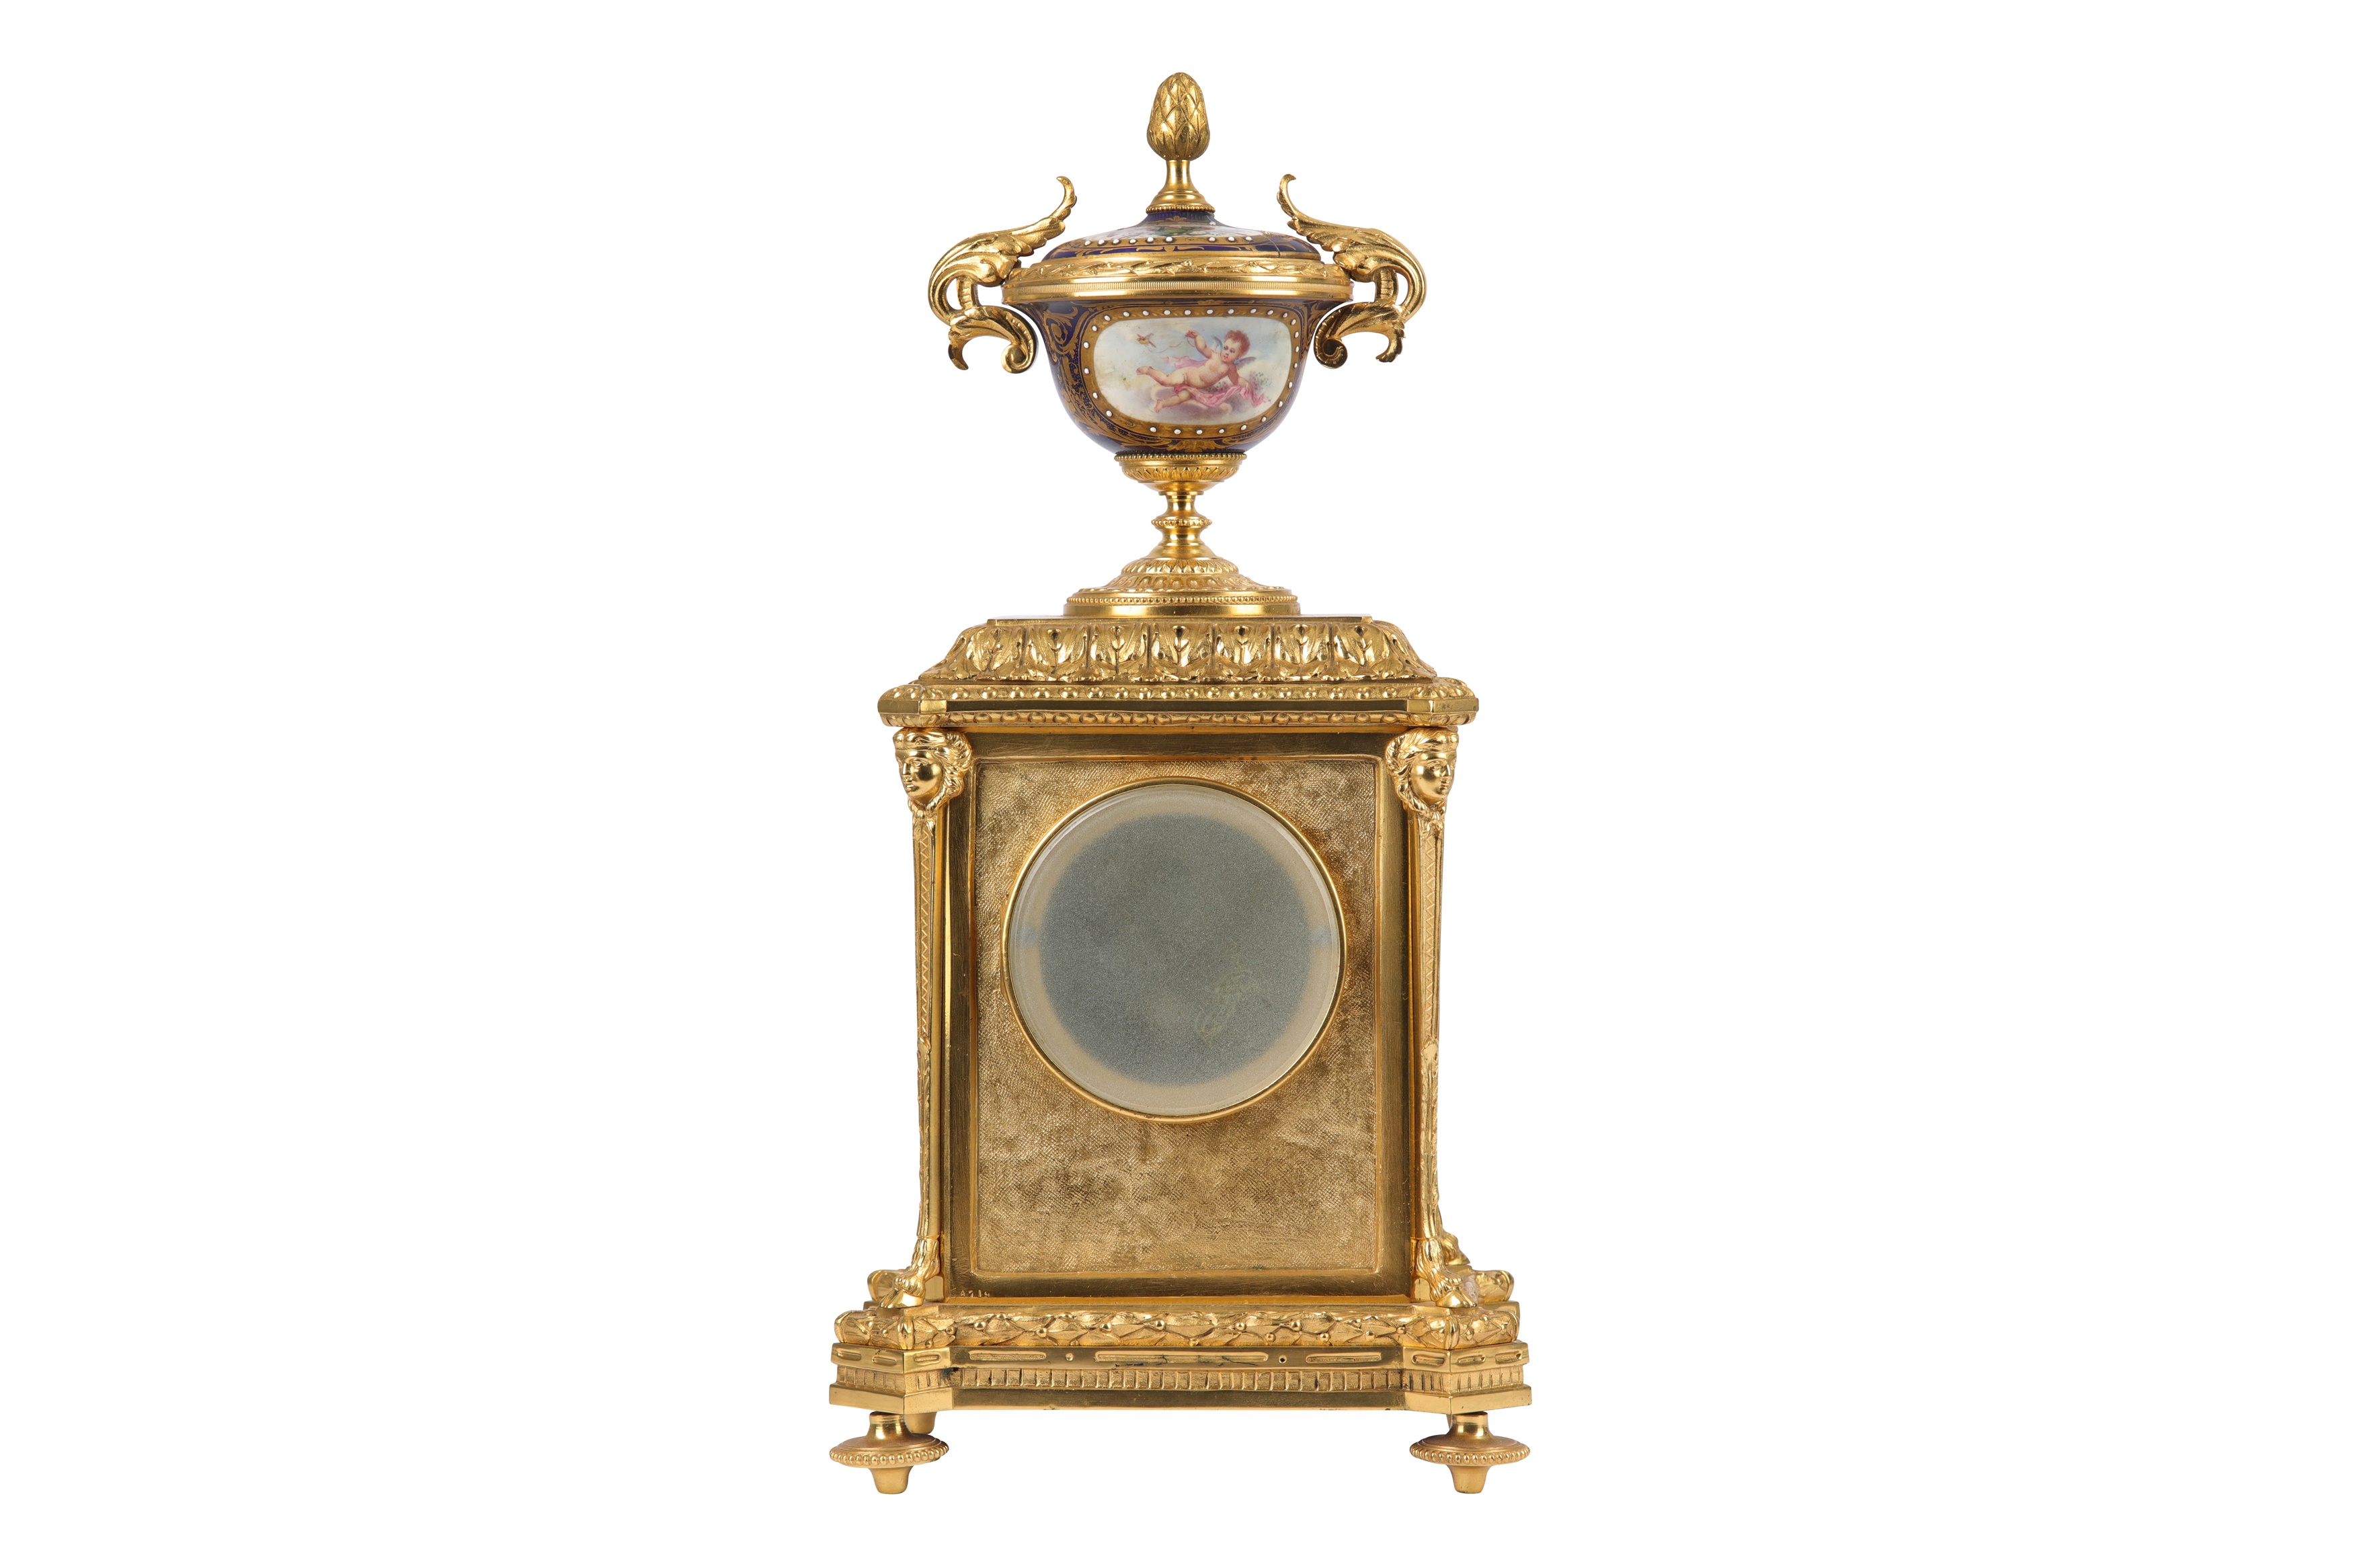 A THIRD QUARTER 19TH CENTURY FRENCH NAPOLEON III GILT BRONZE AND SERVES PORCELAIN MANTEL CLOCK - Image 6 of 8